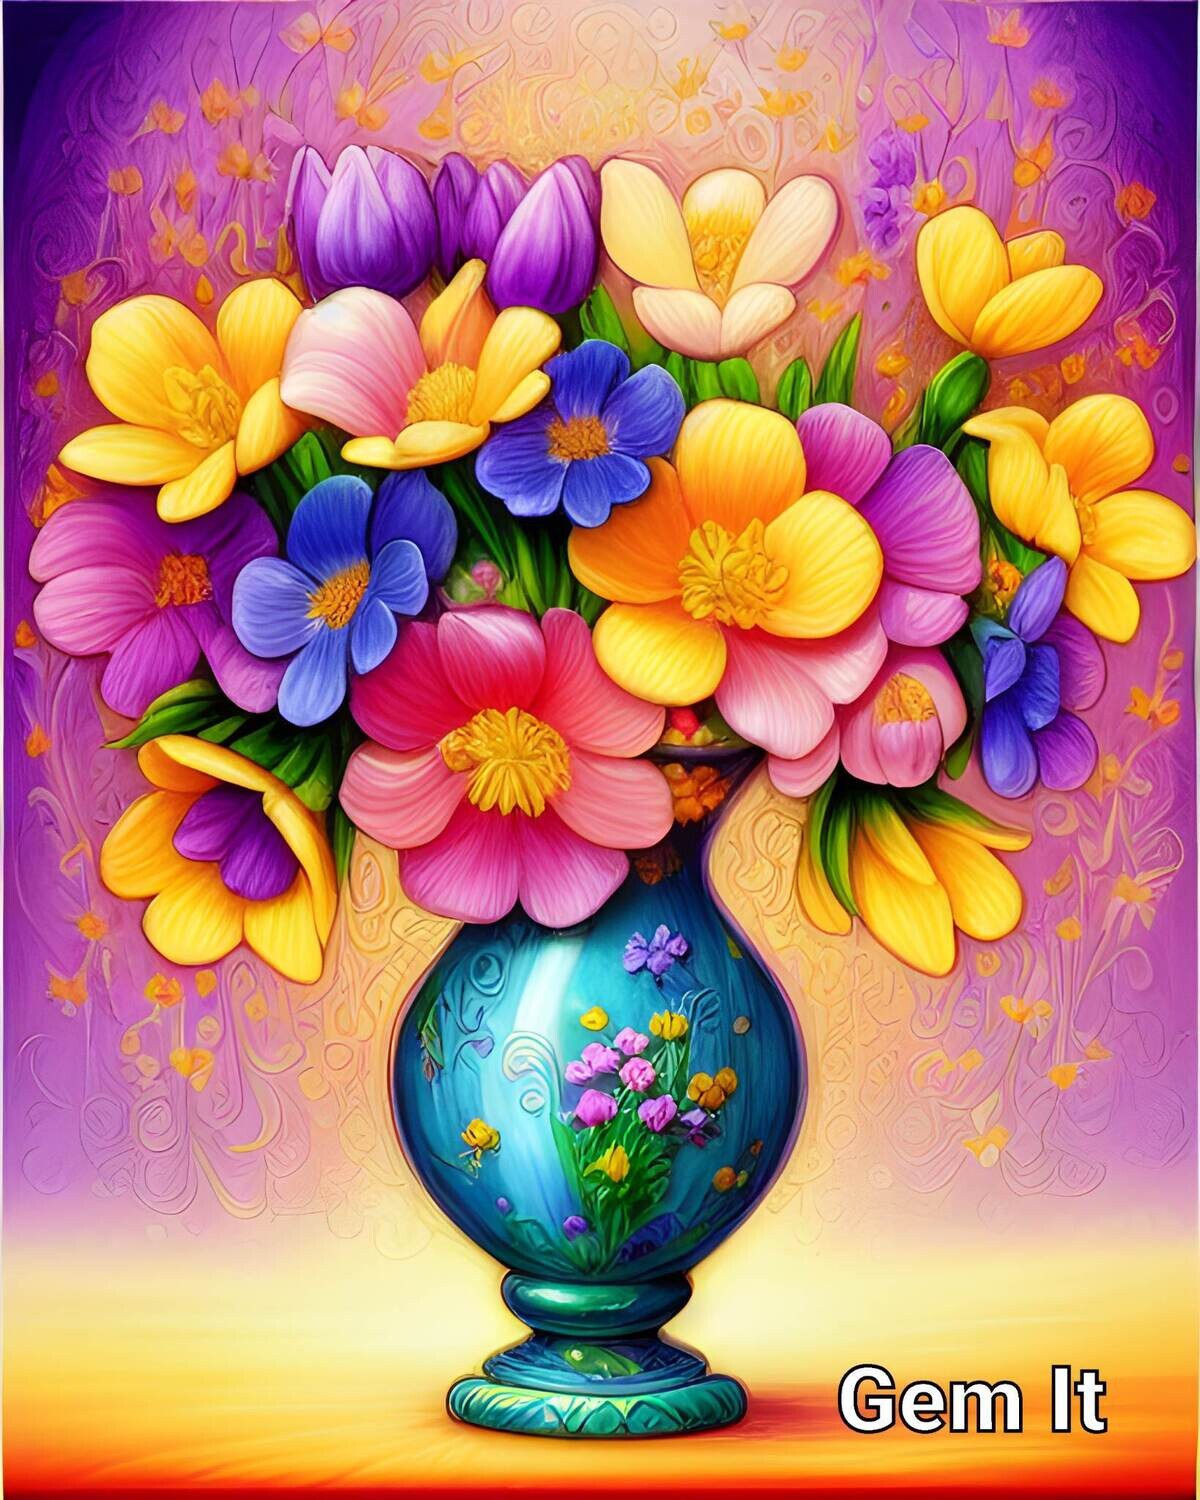 Vase of Flowers D - Specially ordered for you. Delivery is approximately 4 - 6 weeks.